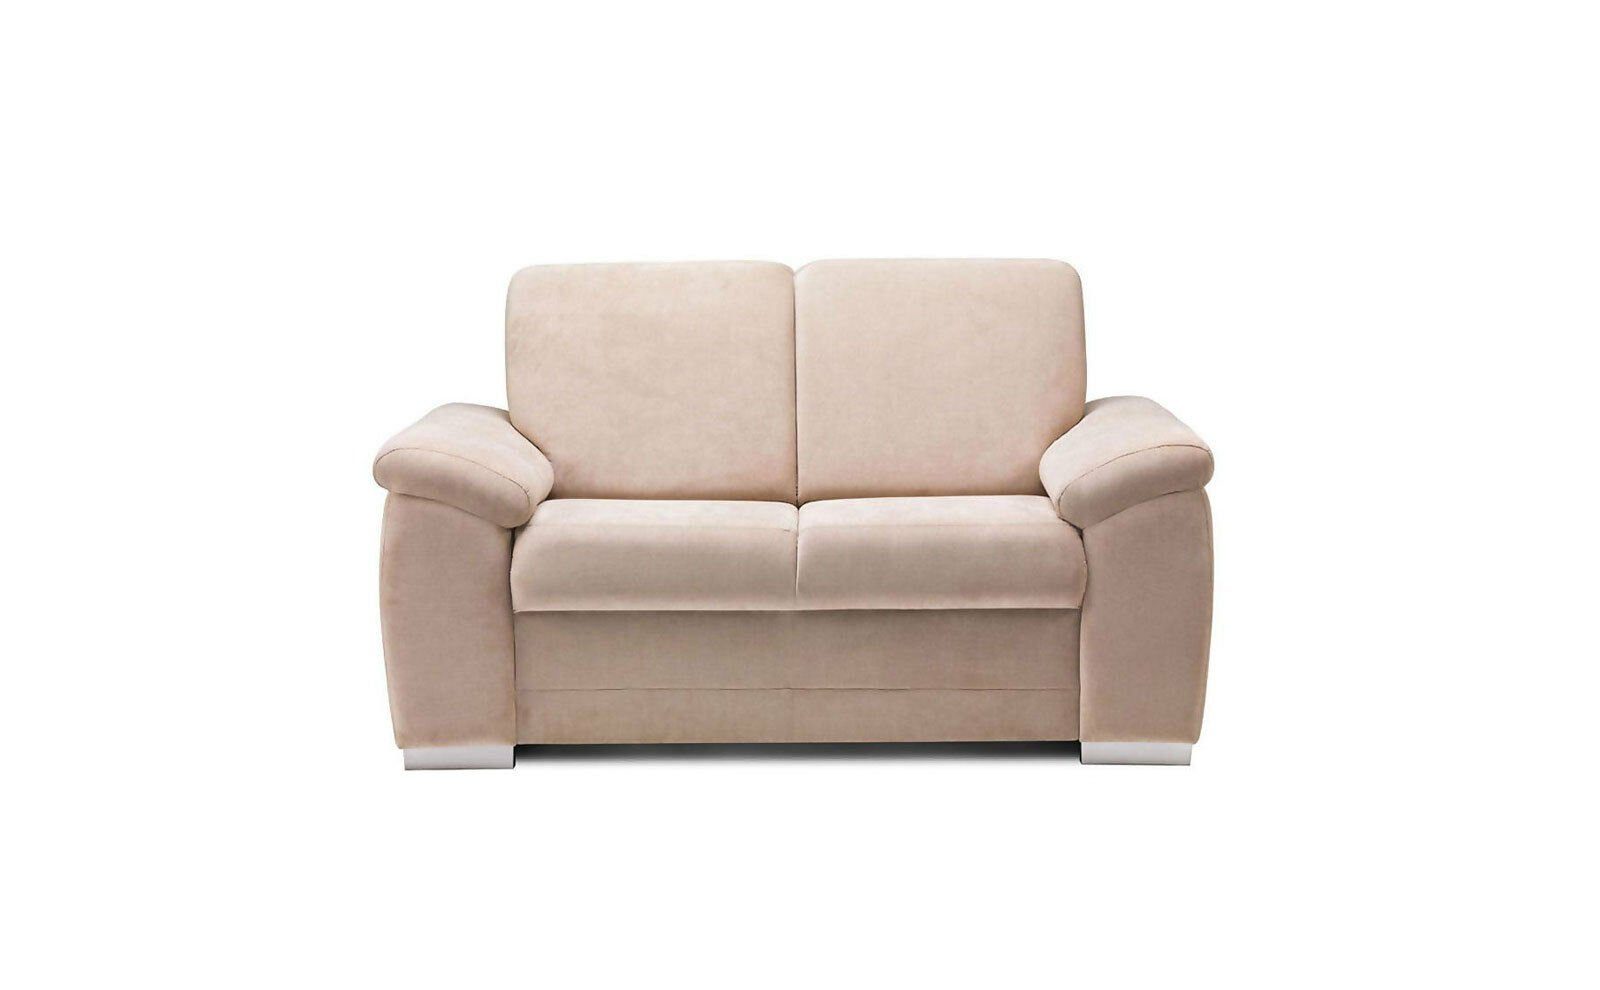 Design Club JVmoebel 2 Lounge Polster Sofa, Sofa Relax Textil Couch Sofas Sitzer